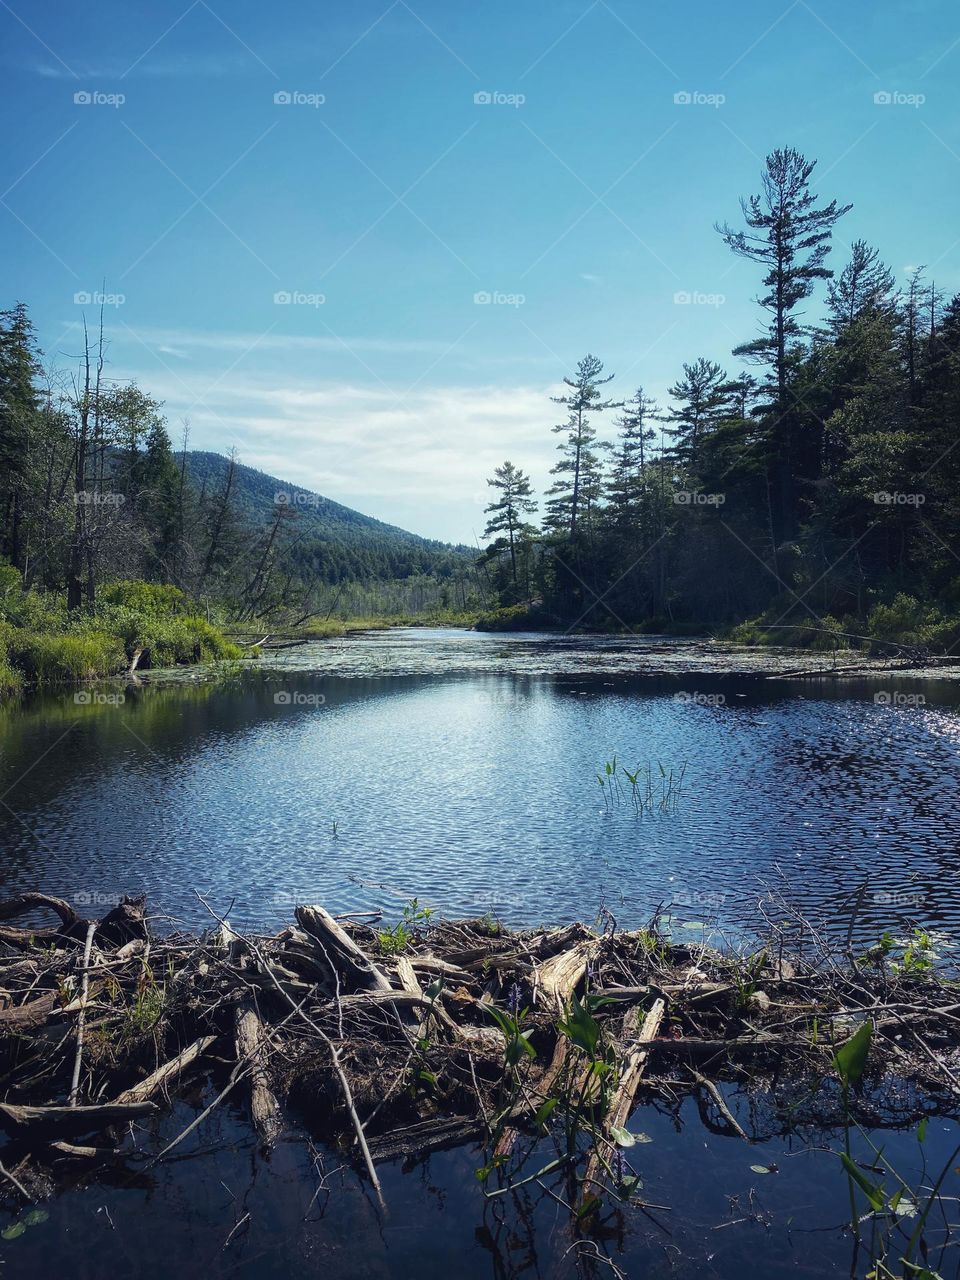 Beaver dam on a stream in the Adirondack mountains of New York State